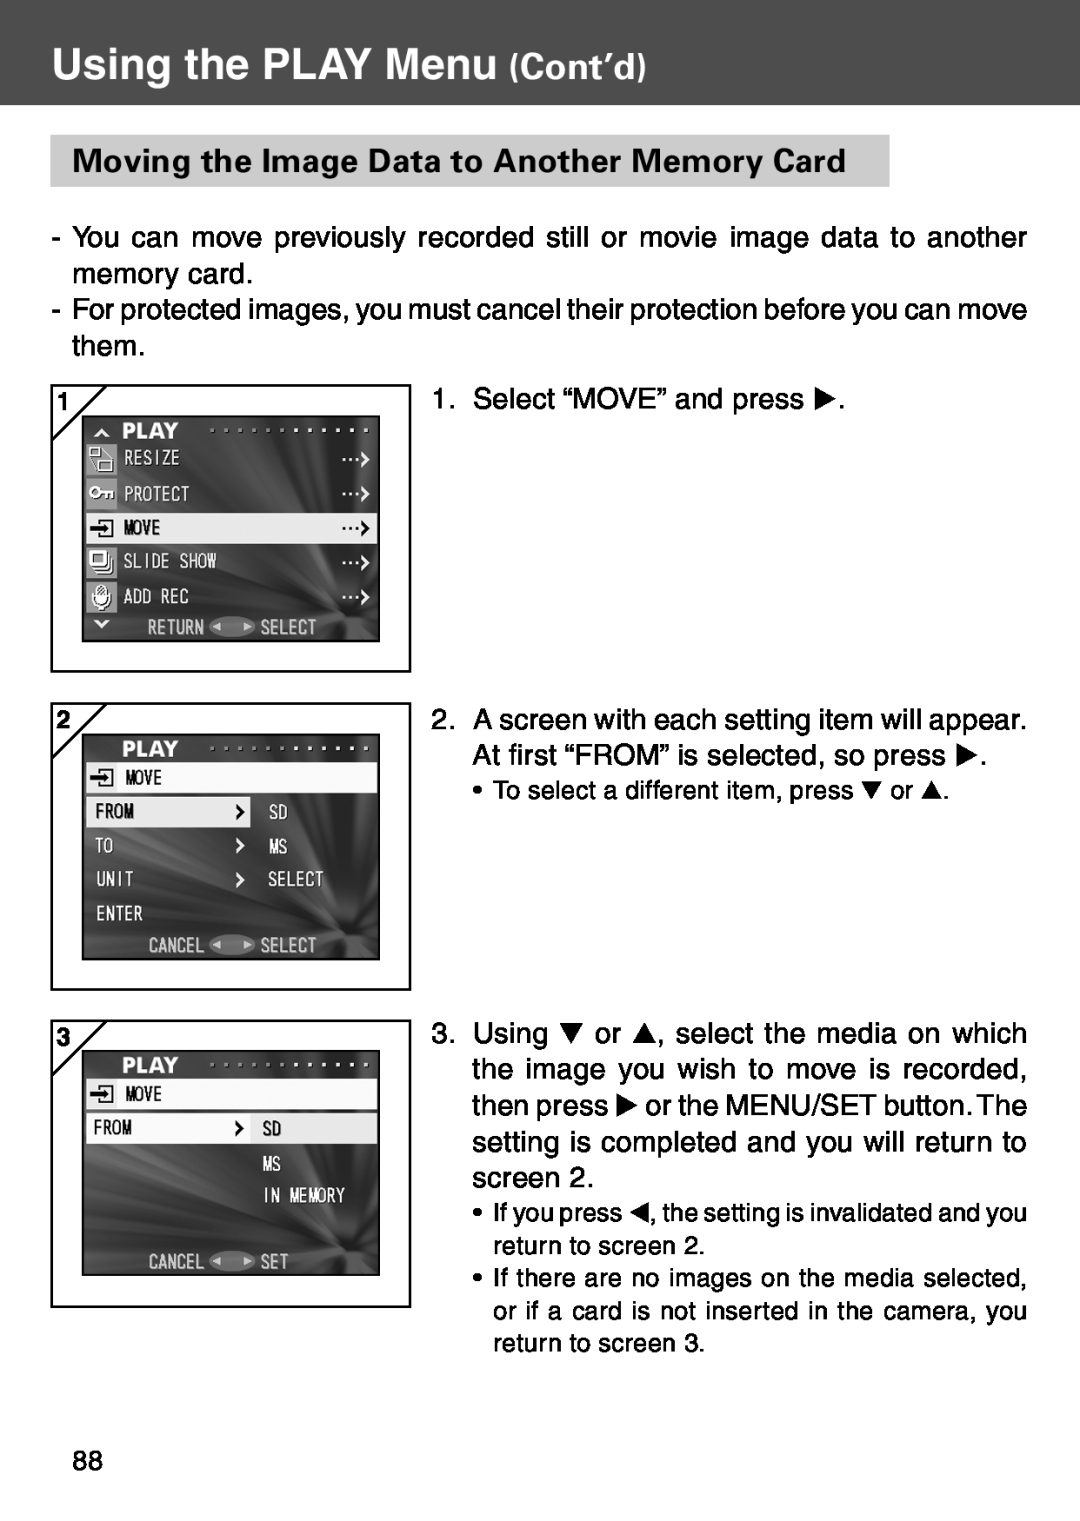 Konica Minolta KD-500Z user manual Moving the Image Data to Another Memory Card, Using the PLAY Menu Cont’d 